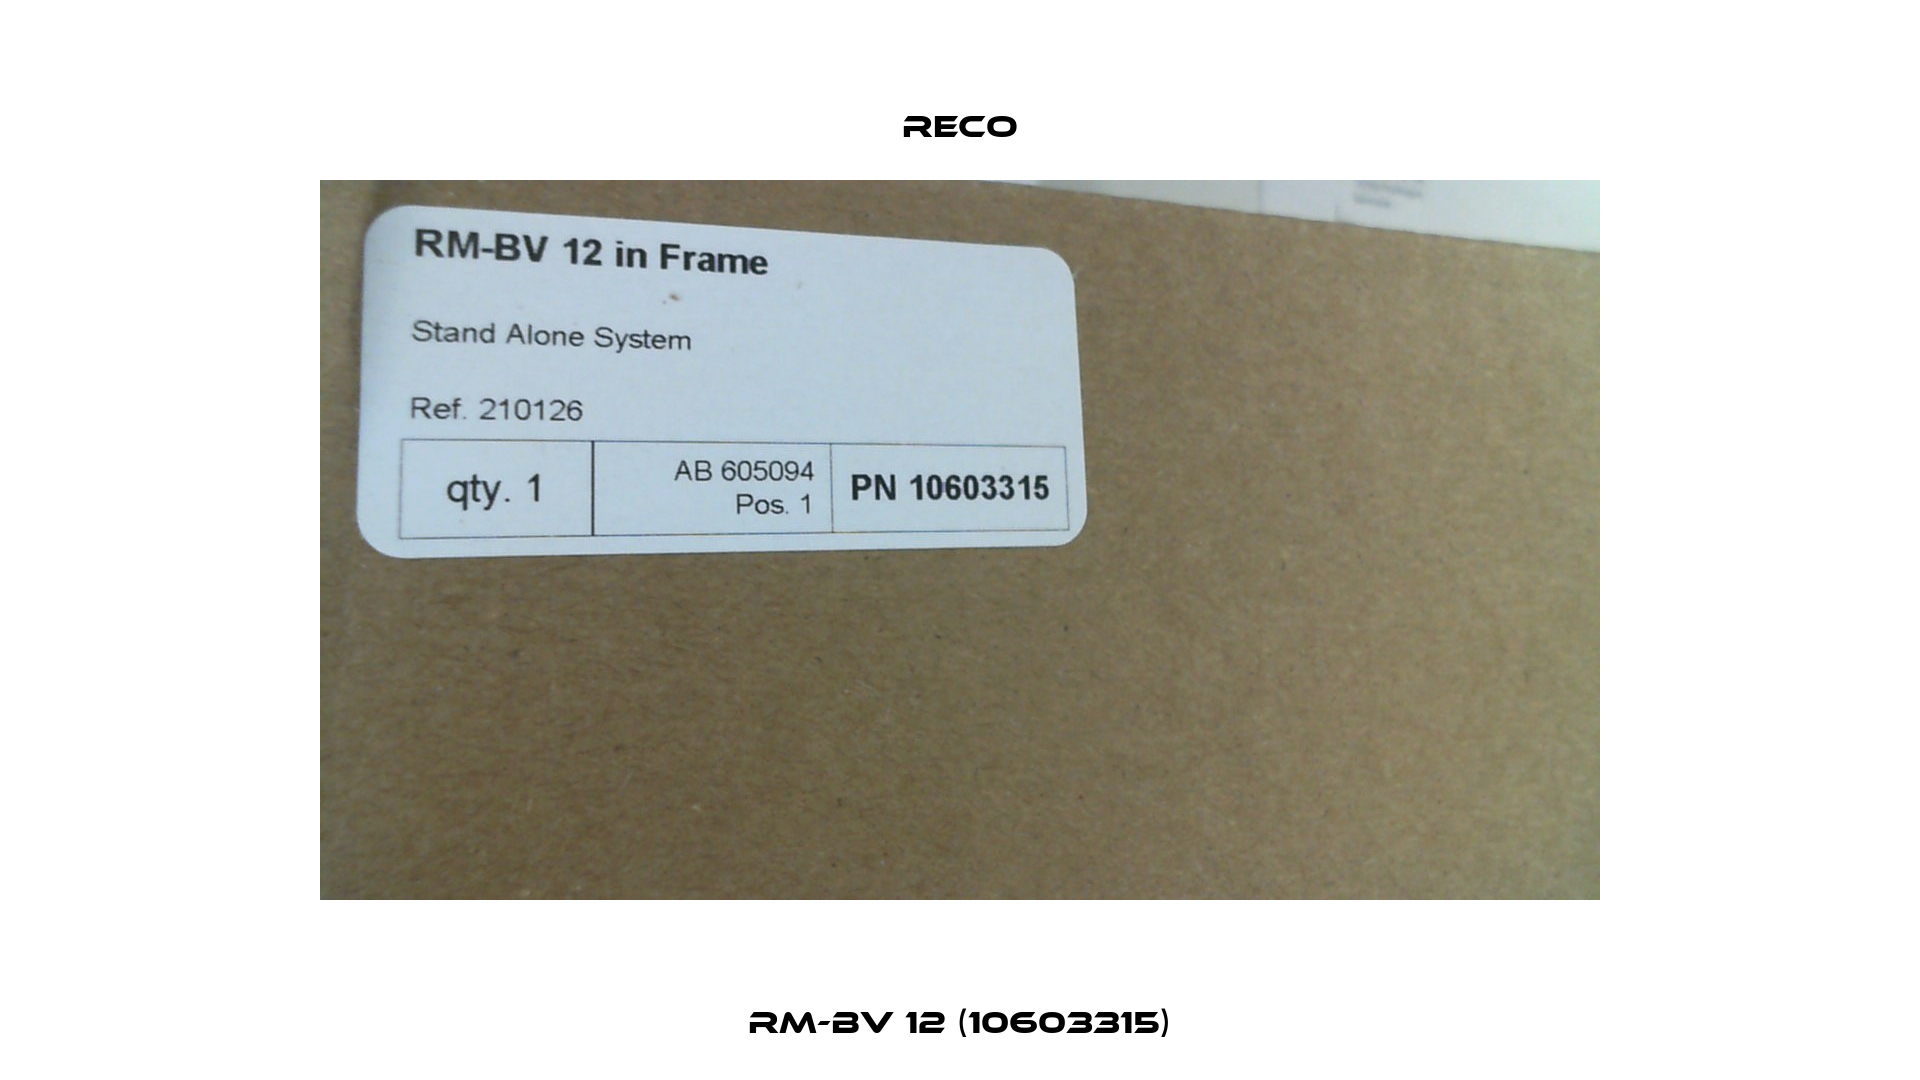 RM-BV 12 (10603315) Reco